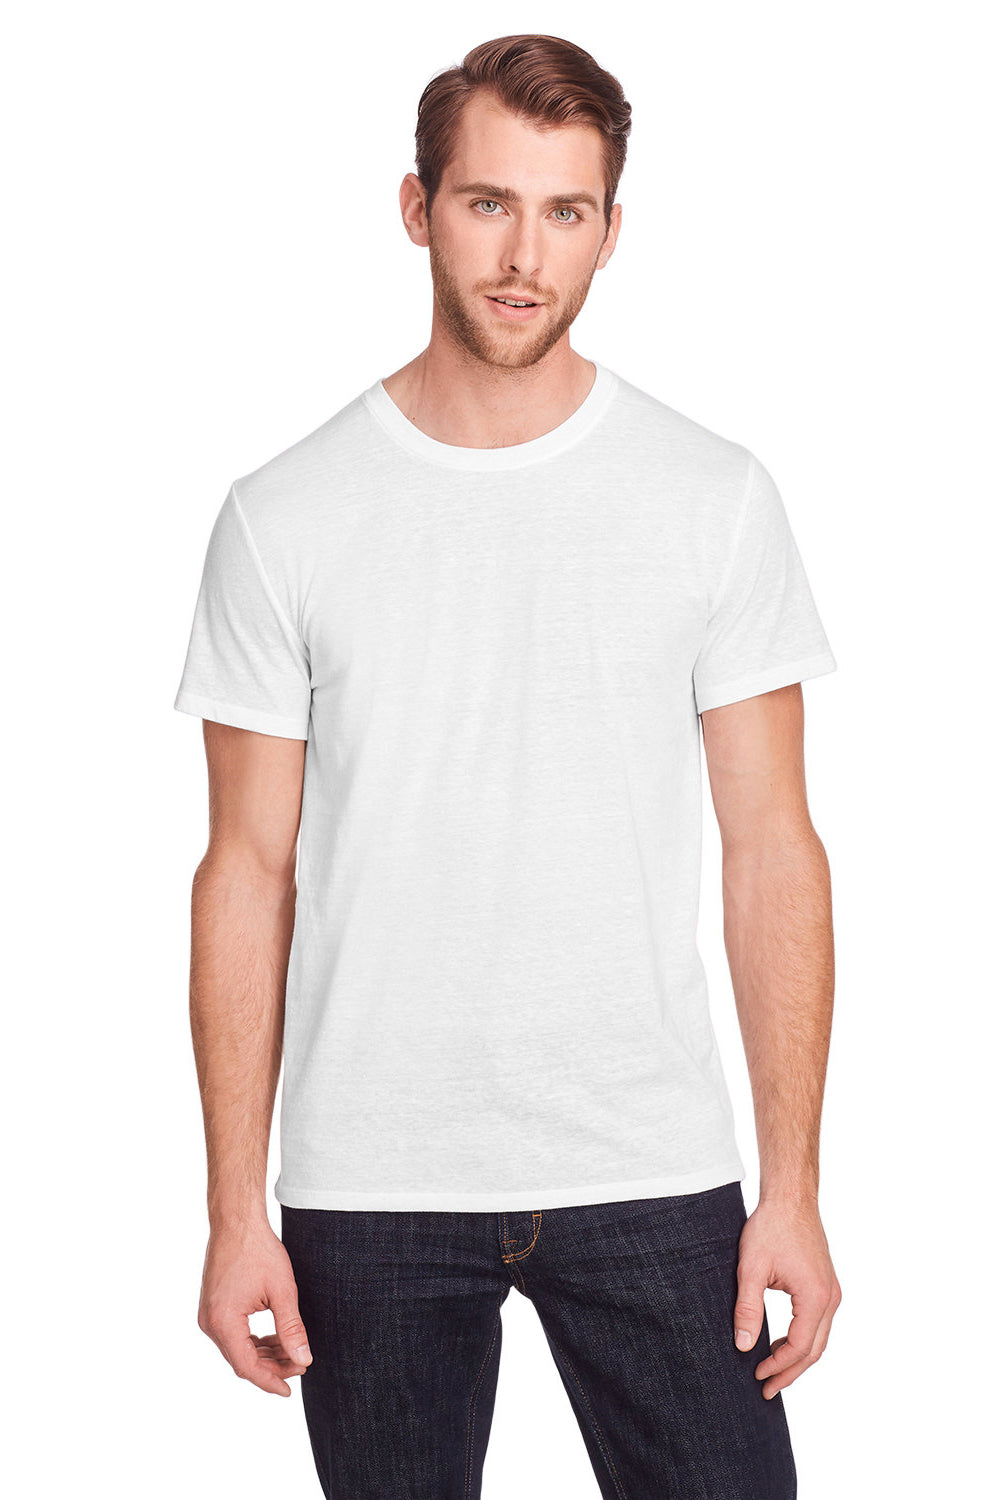 Threadfast Apparel 102A Mens Short Sleeve Crewneck T-Shirt Solid White Front